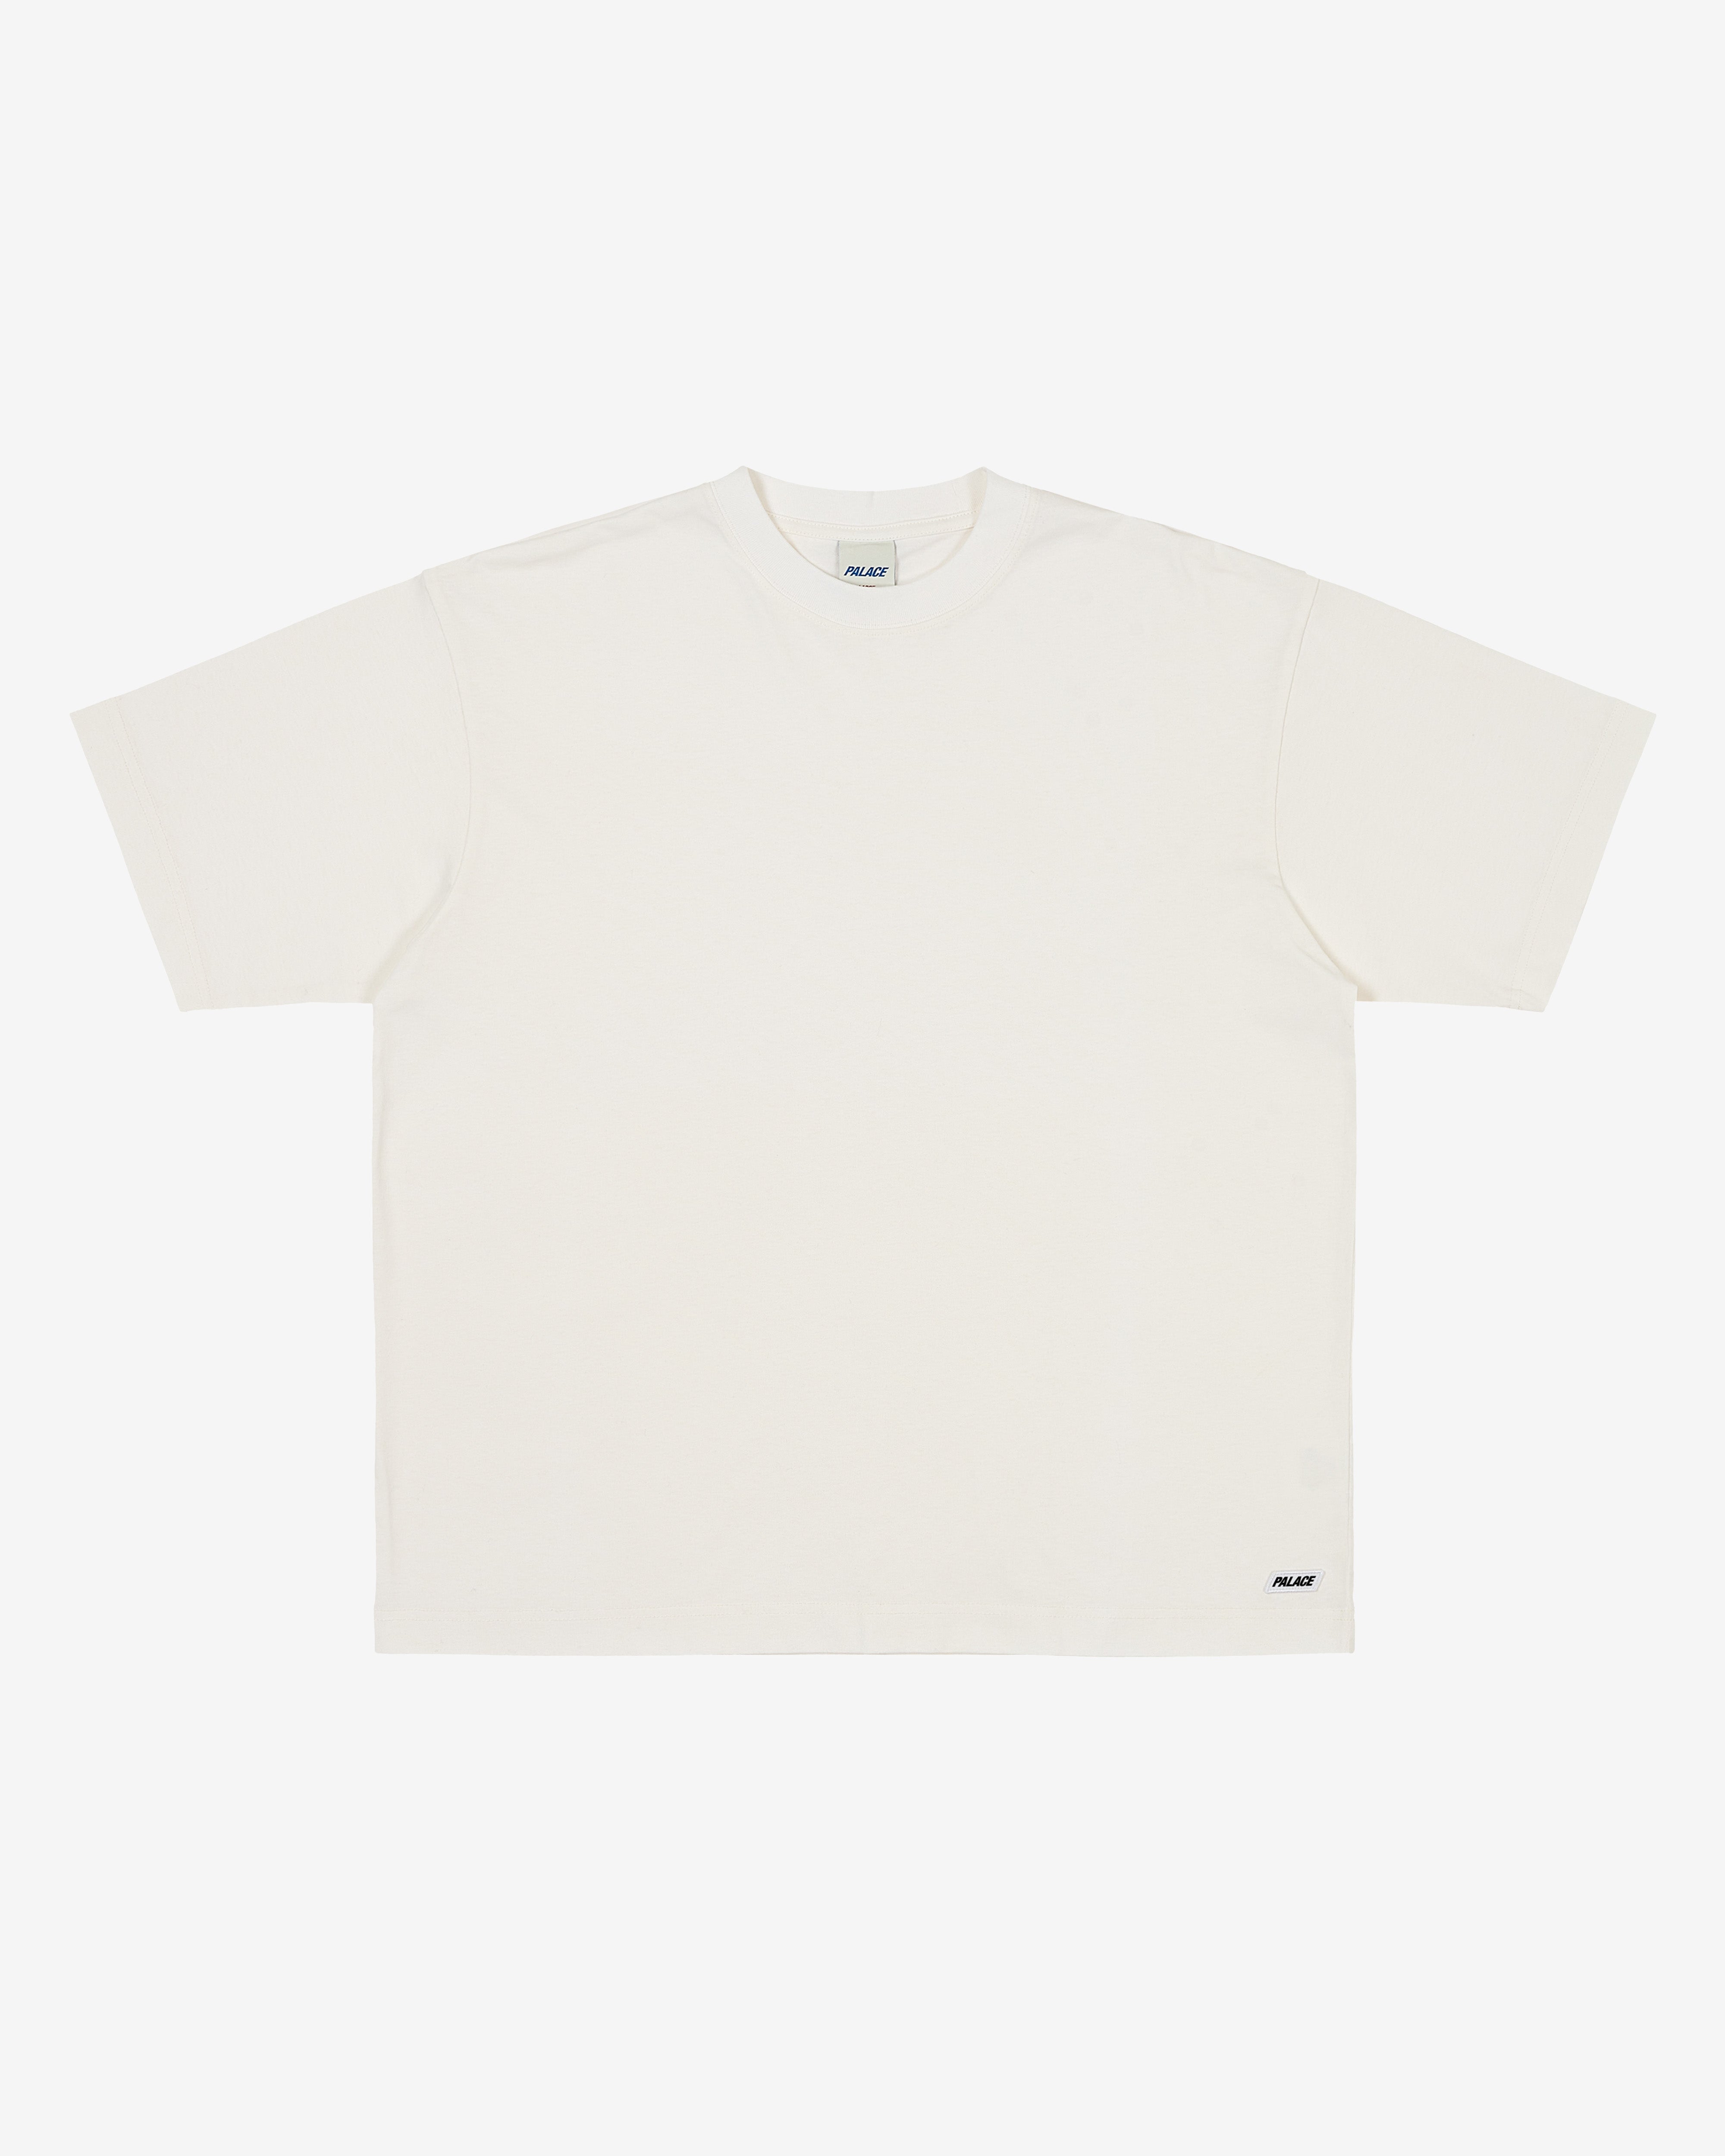 Palace x Dover Street Market Special Anniversary T-Shirt White/Glow